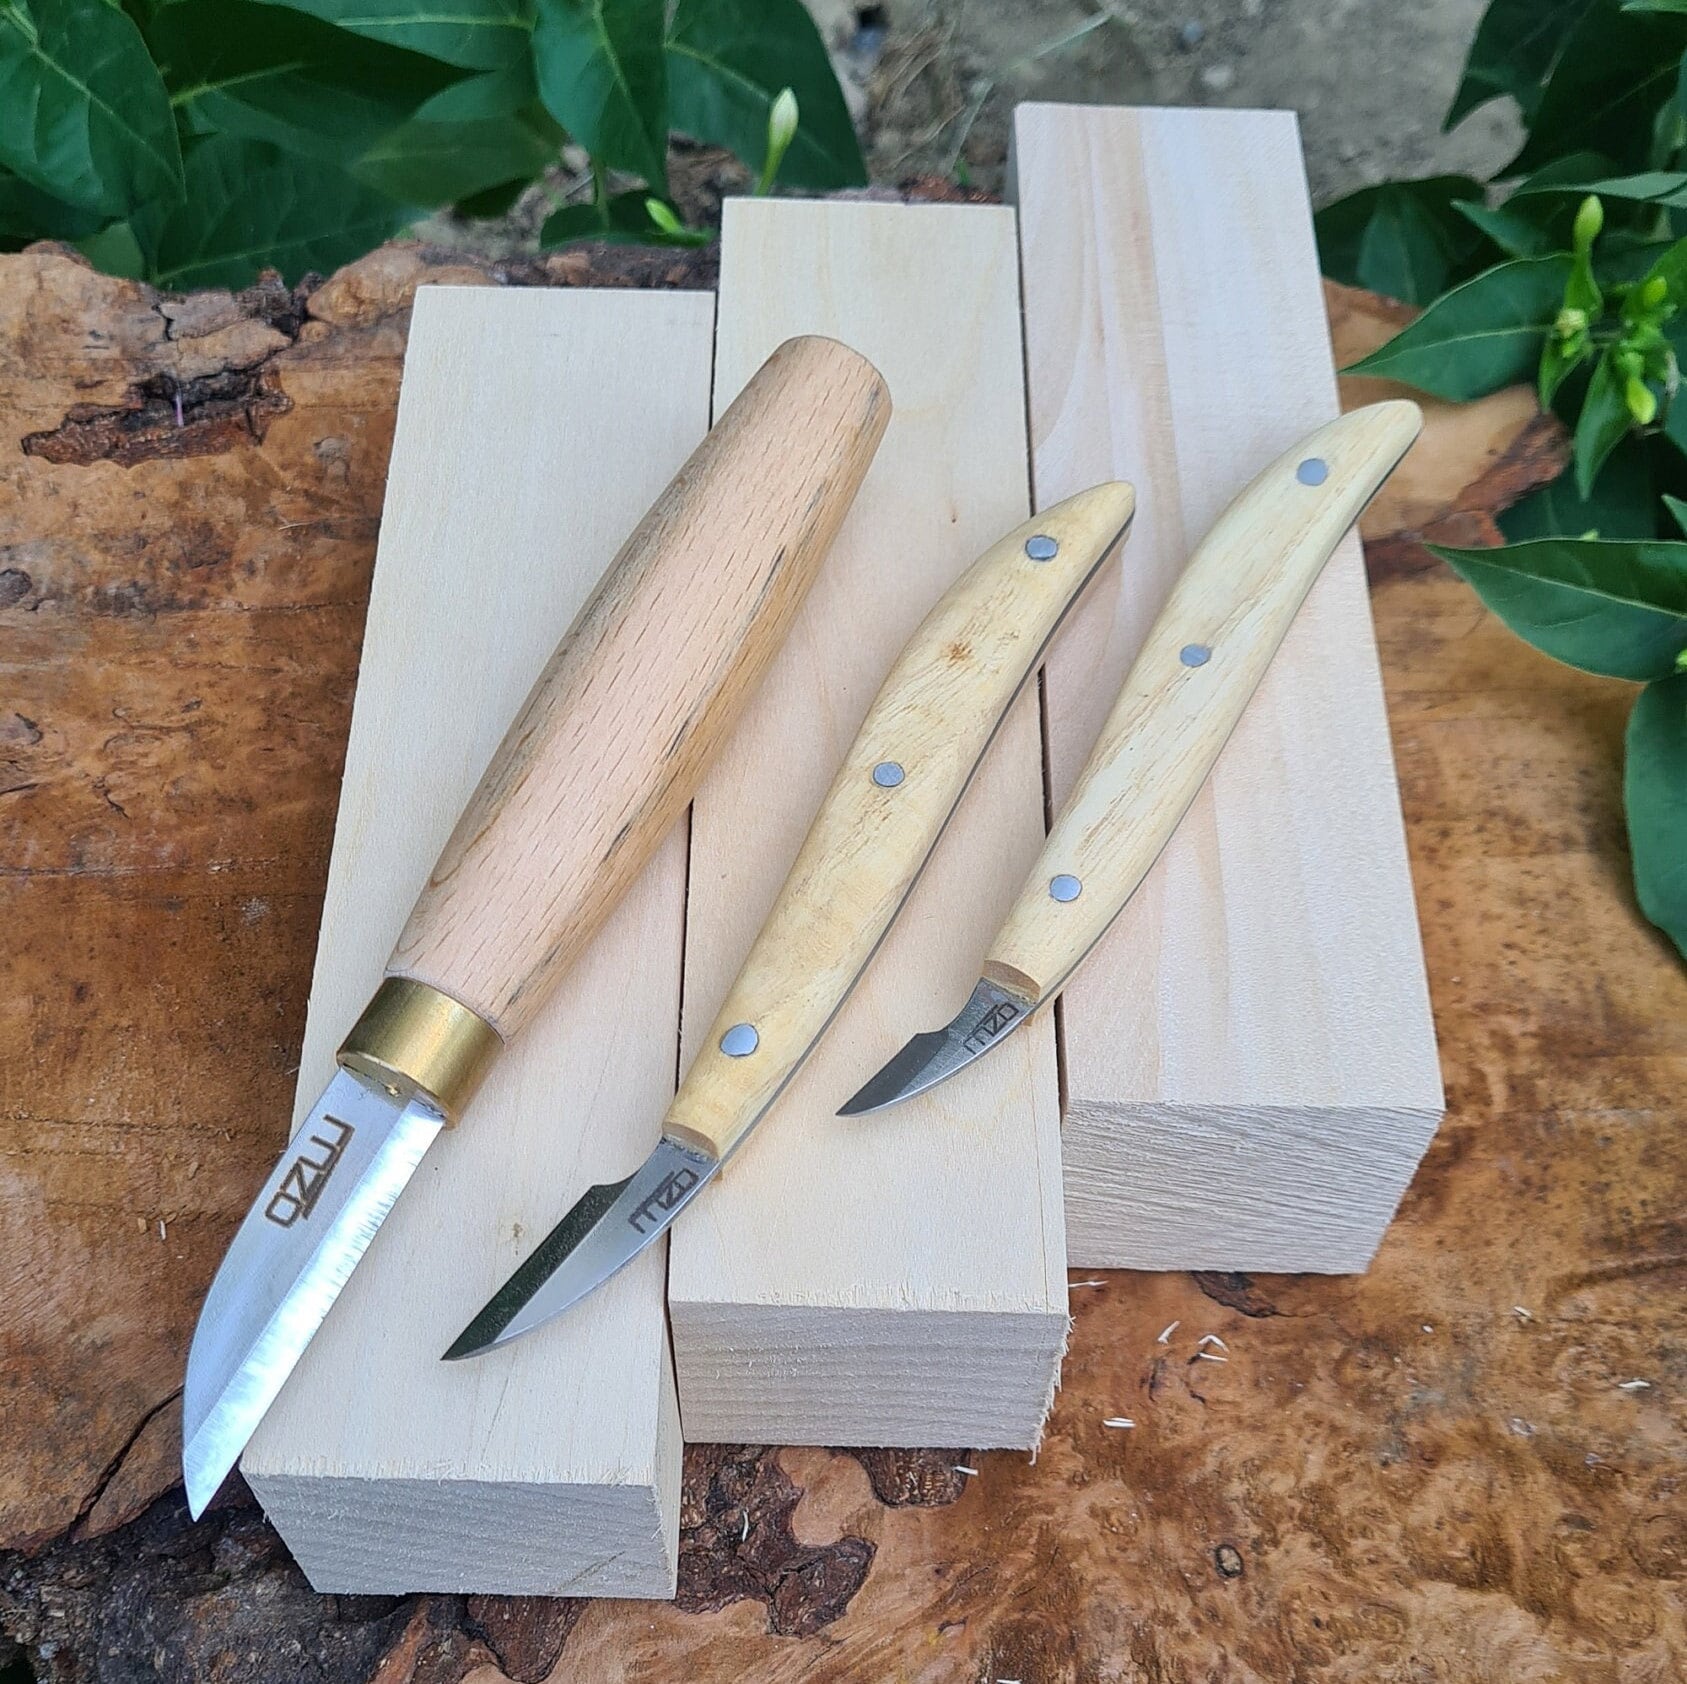 Wood Carving Set With Men's Thimbles, Wood Carving Set, Wood Carving Knives.  Knives for Carving Wood. Wood Carving Tools Wood Carving Knife 